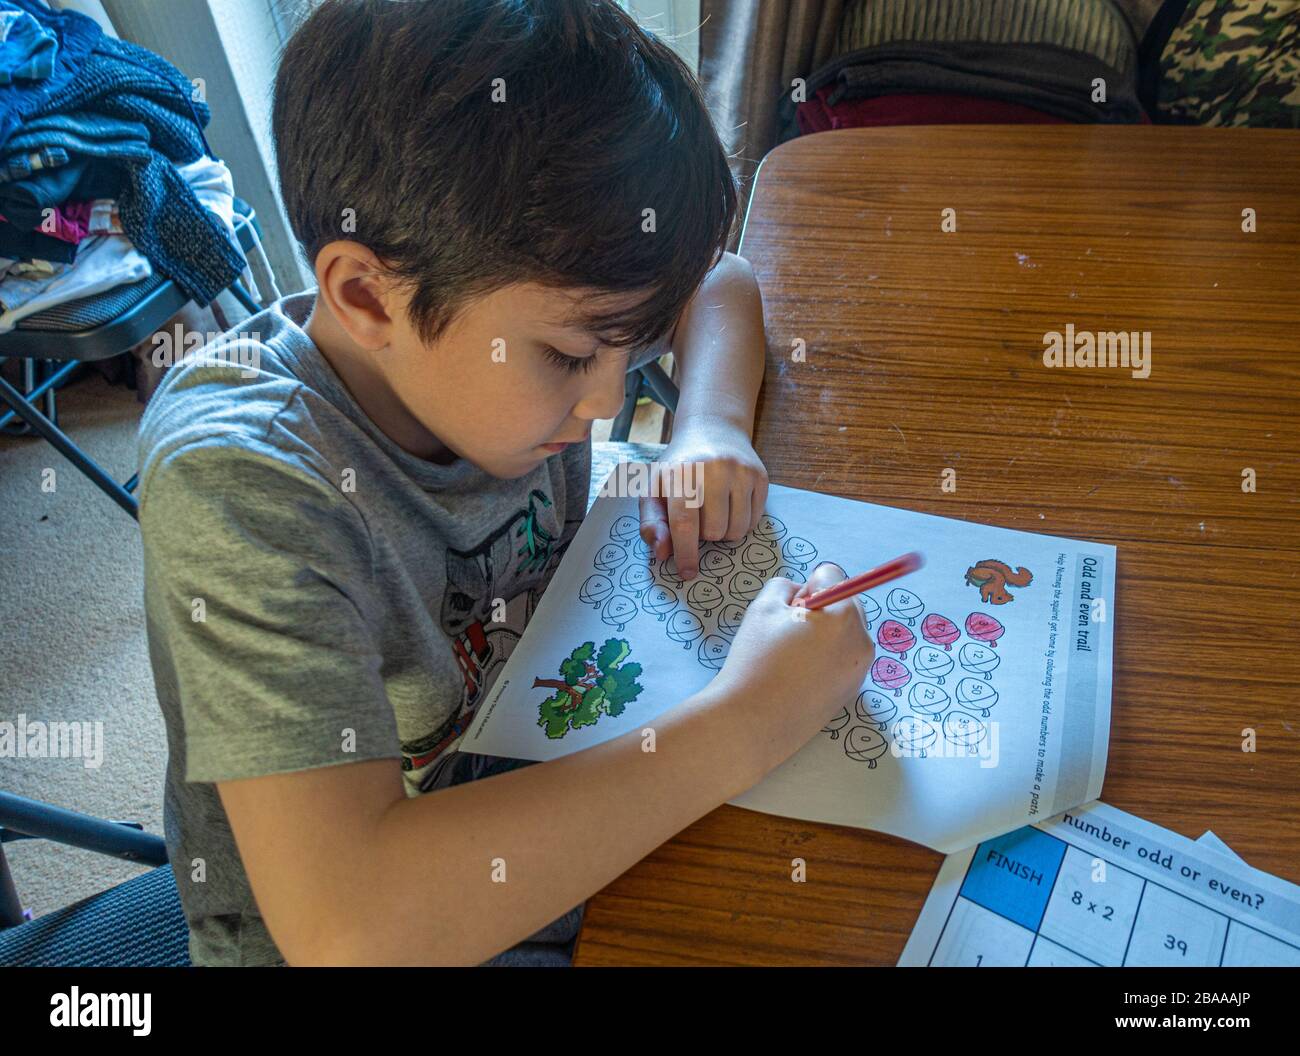 A young boy colouring in odd numbered shapes as part of a home schooling exercise. He is learning from home due to coronavirus. Stock Photo